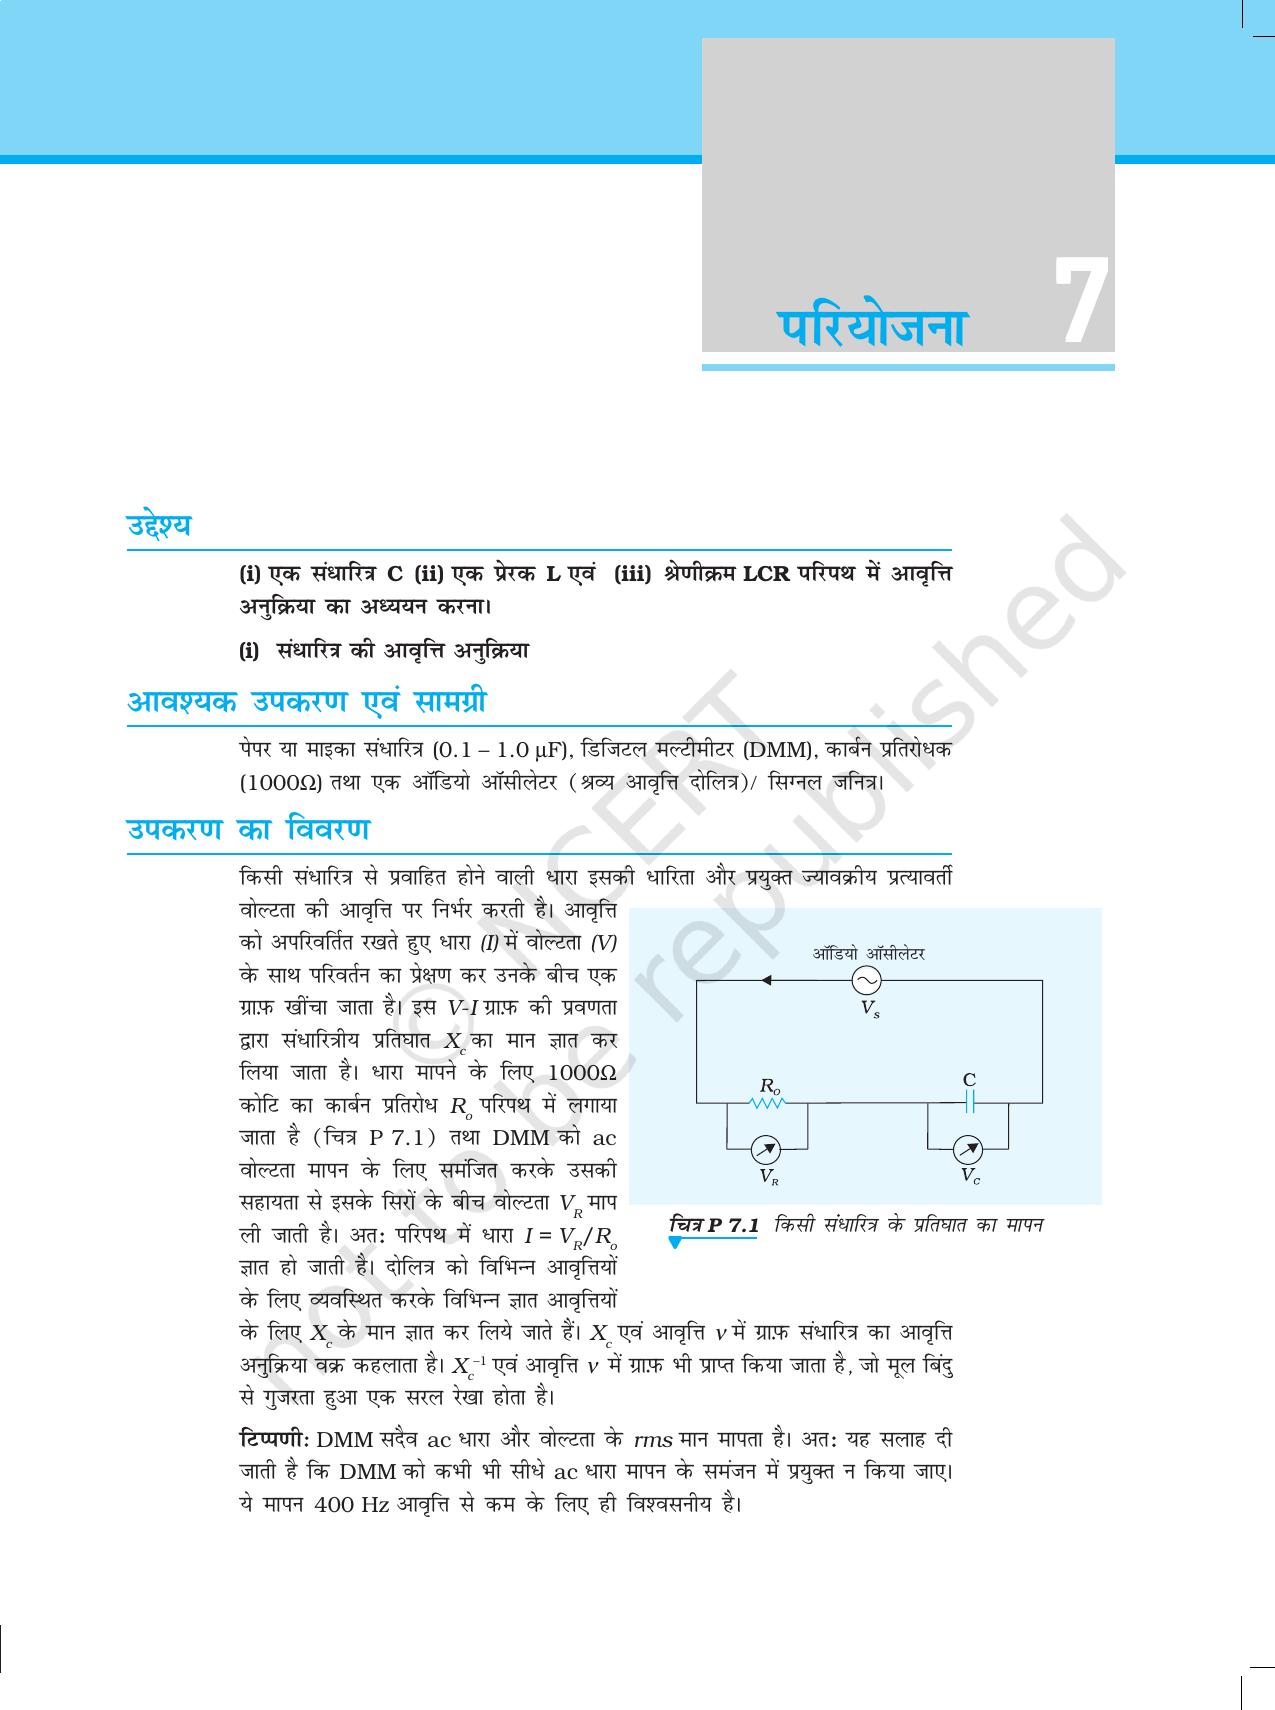 NCERT Laboratory Manuals for Class XII भौतिकी - परियोजना (1 - 7) - Page 27